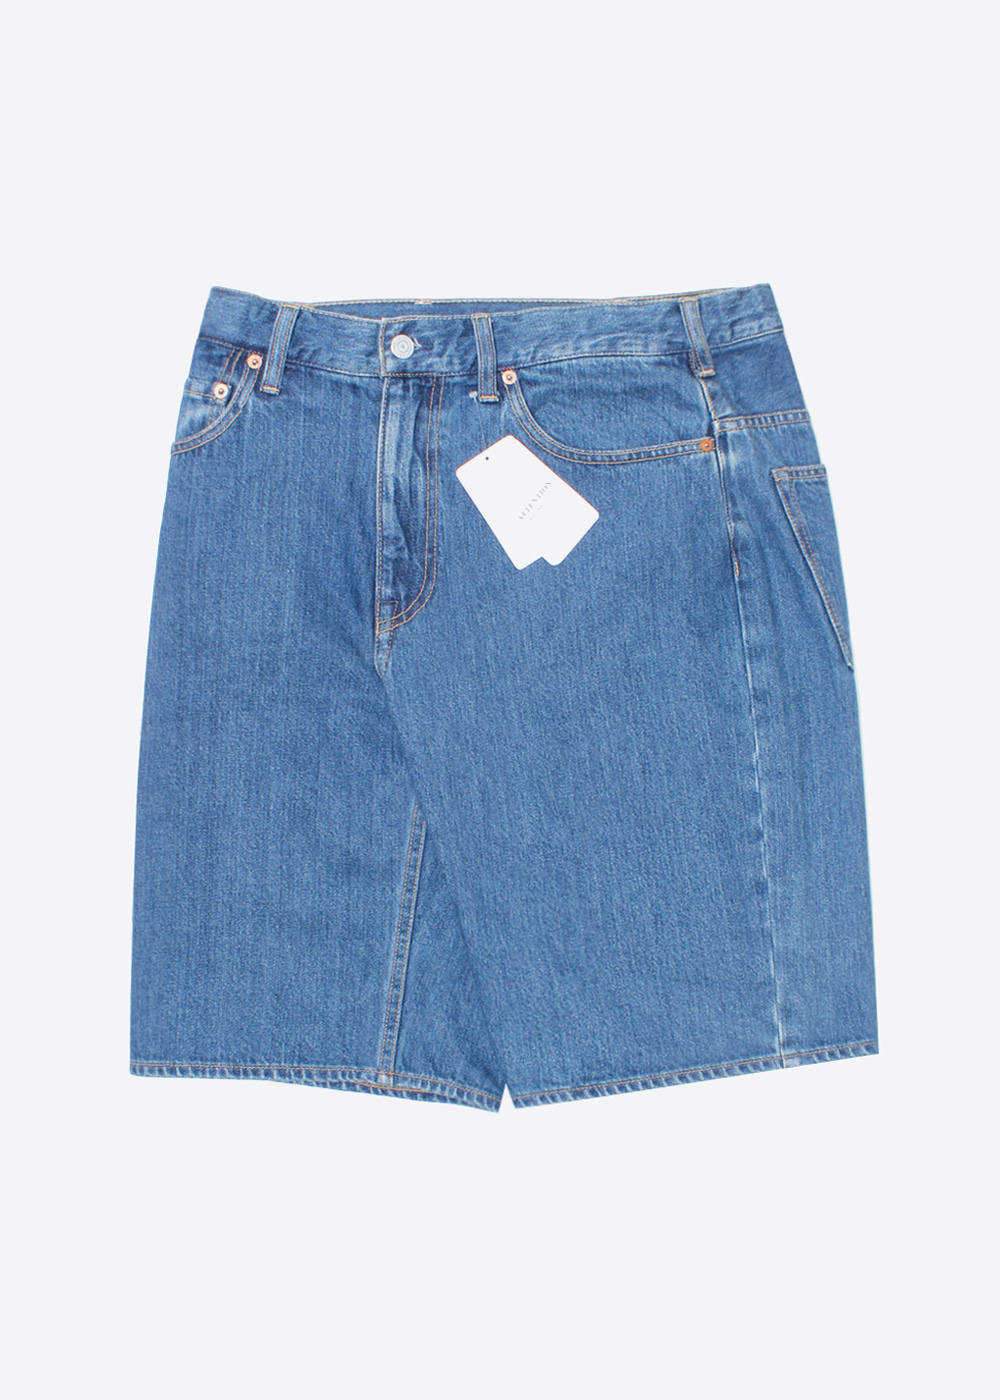 RELUME BY JOURNAL STANDARD’loose fit’ denim shorts